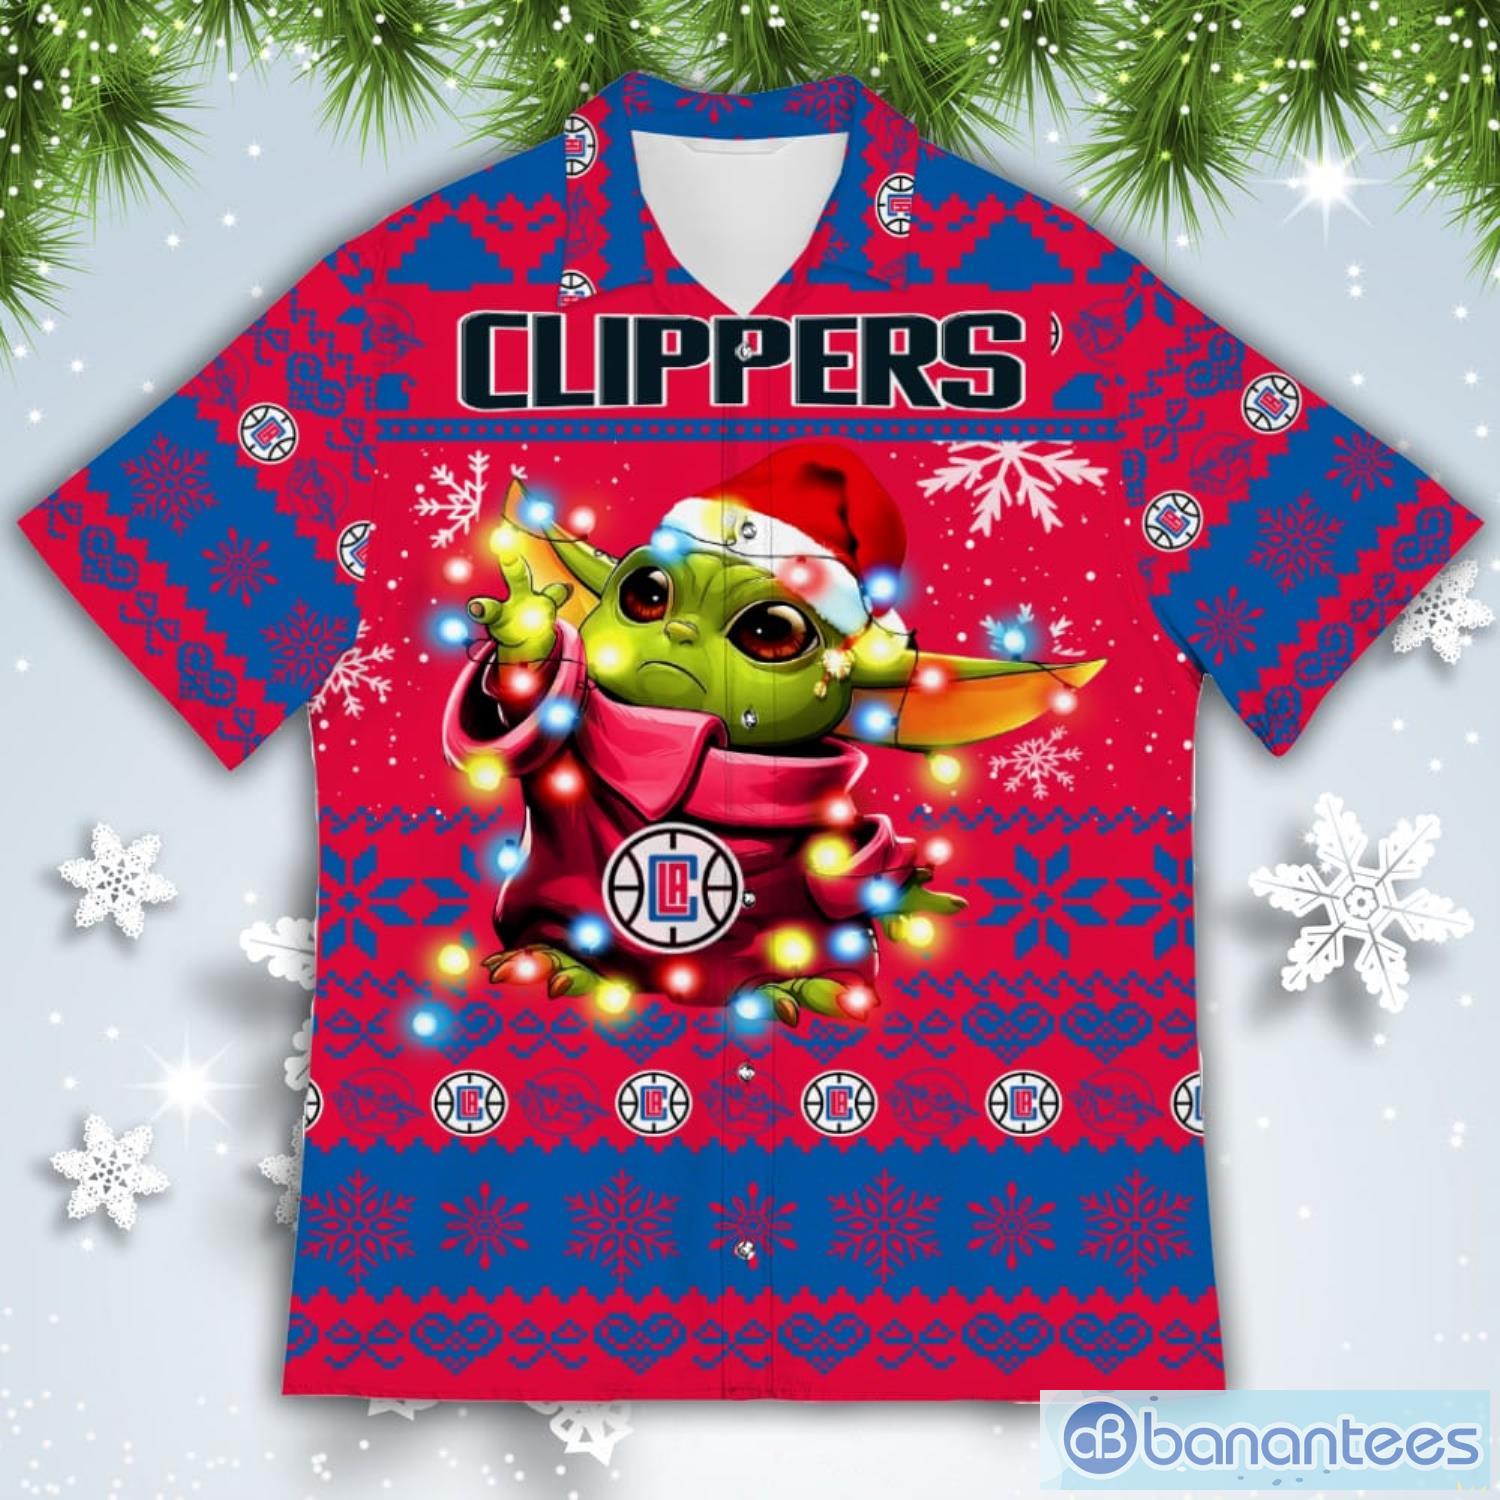 la clippers ugly sweater